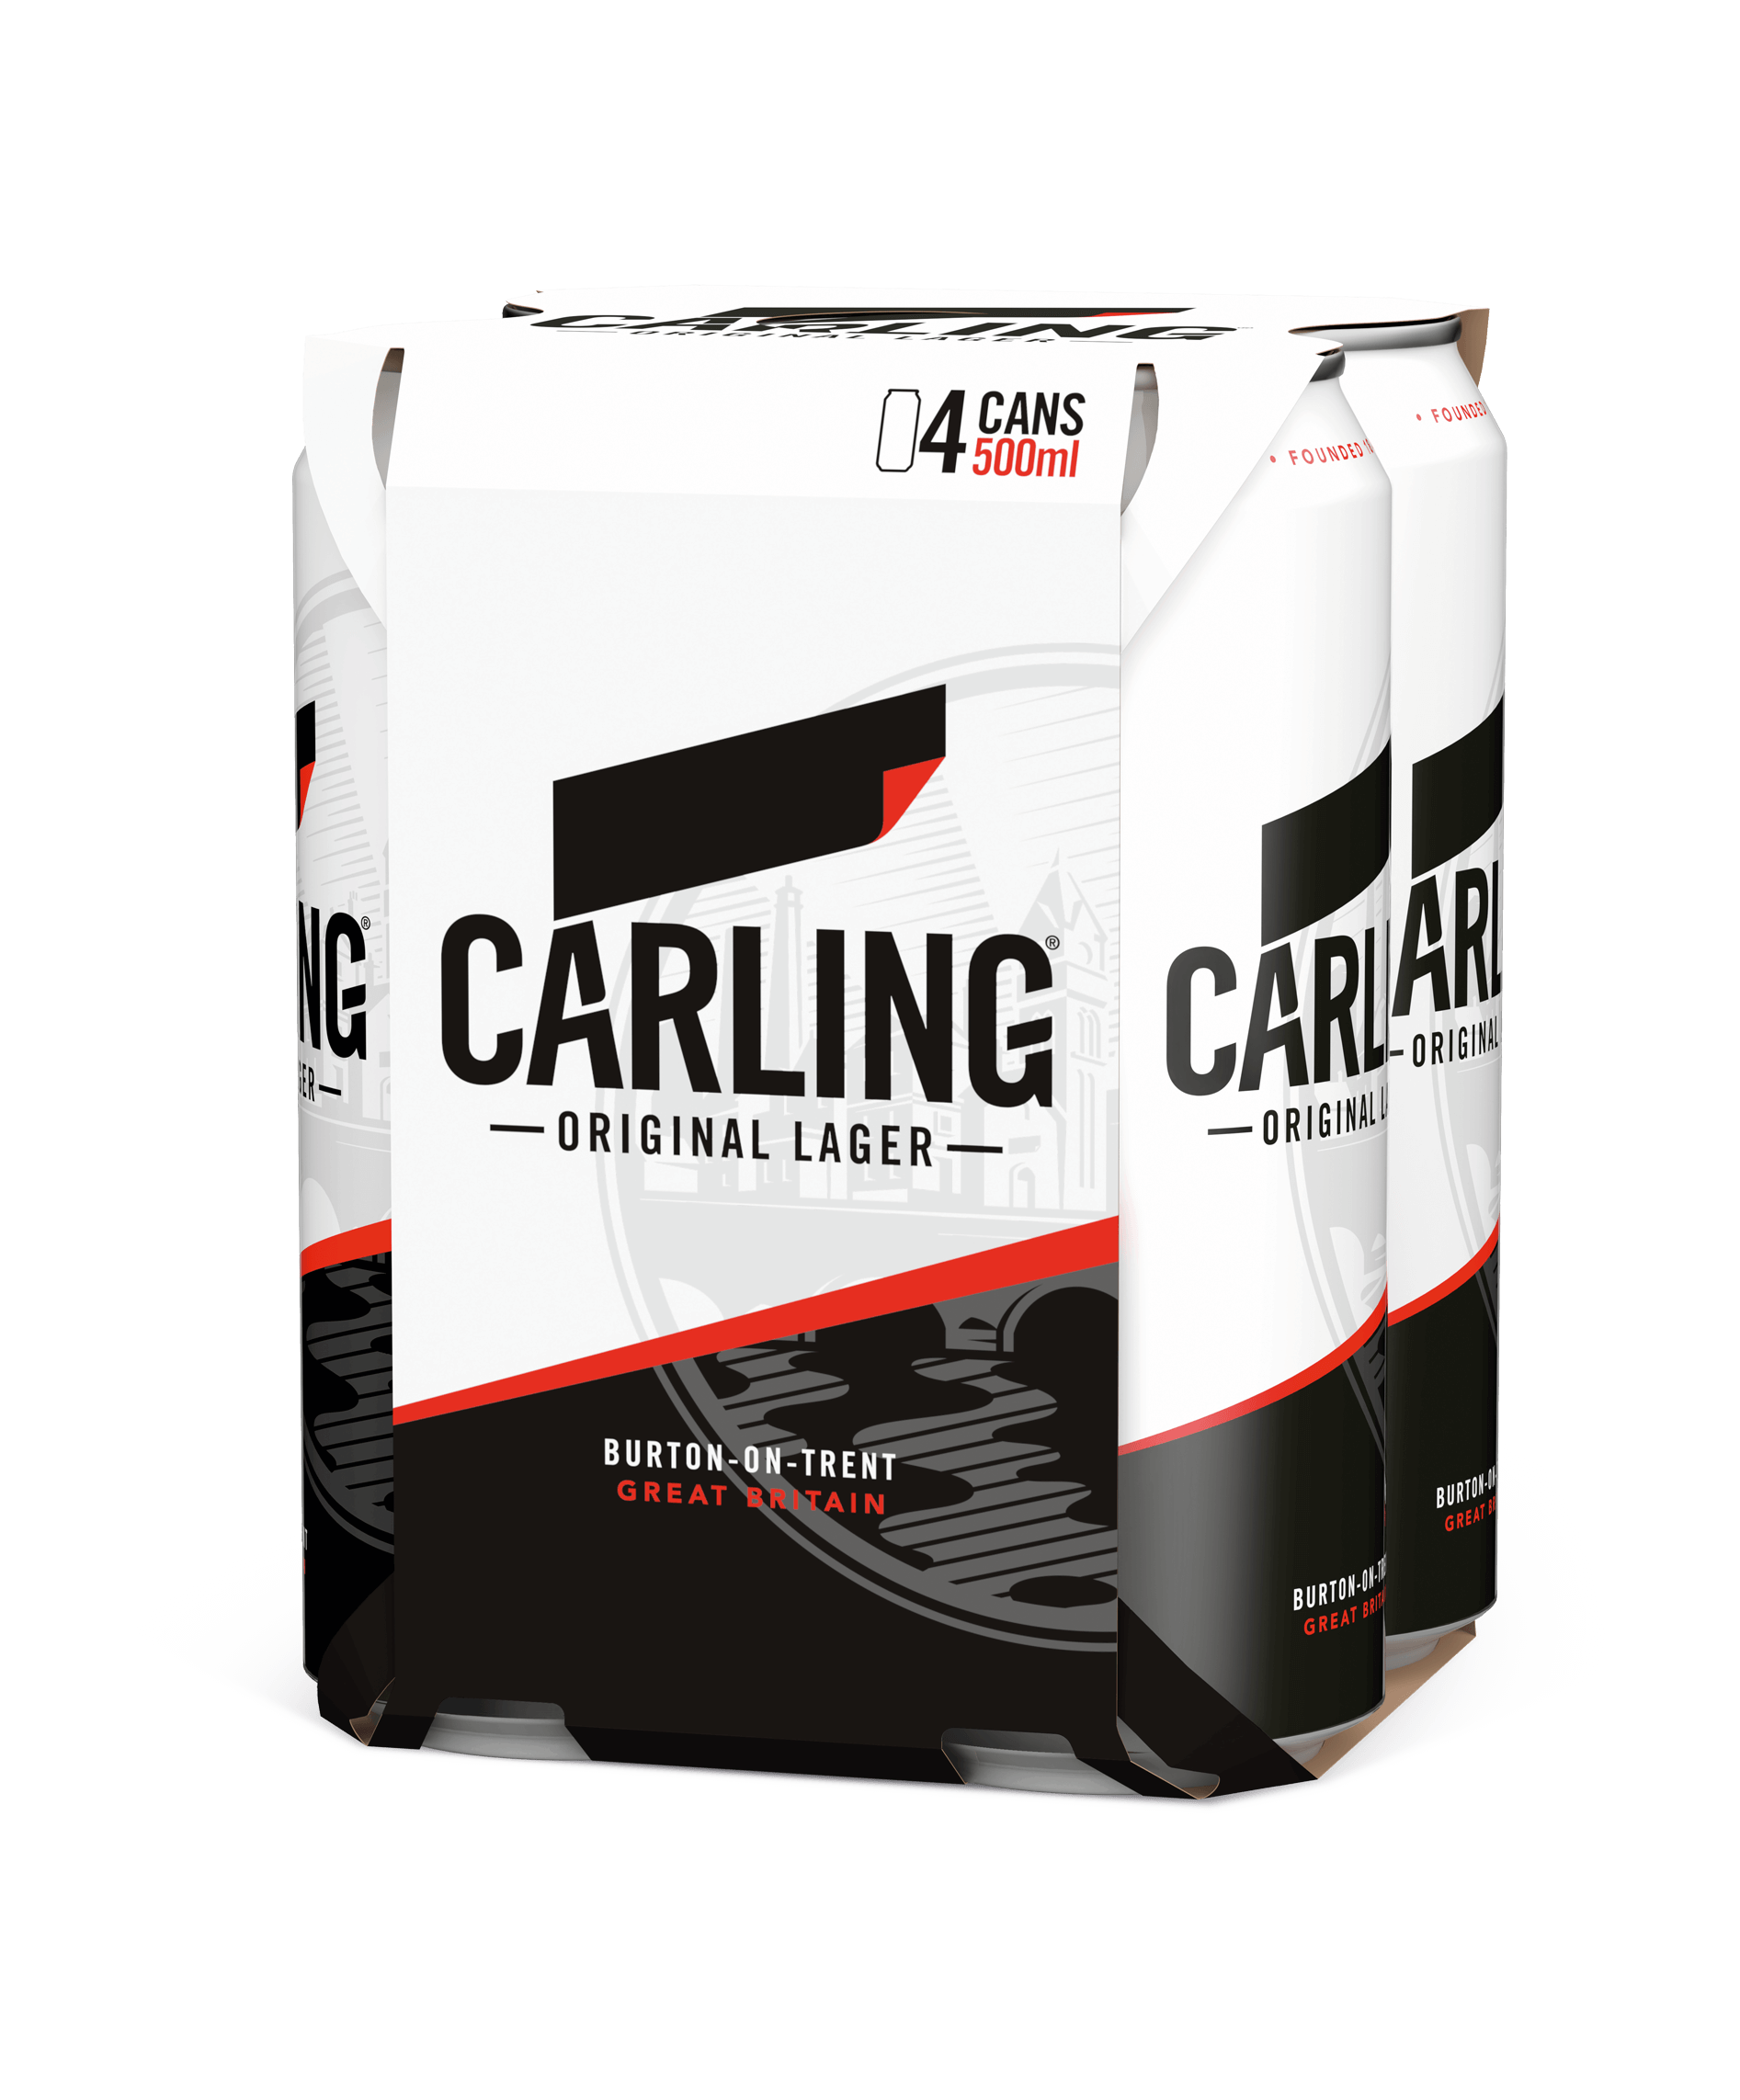 Carling pack